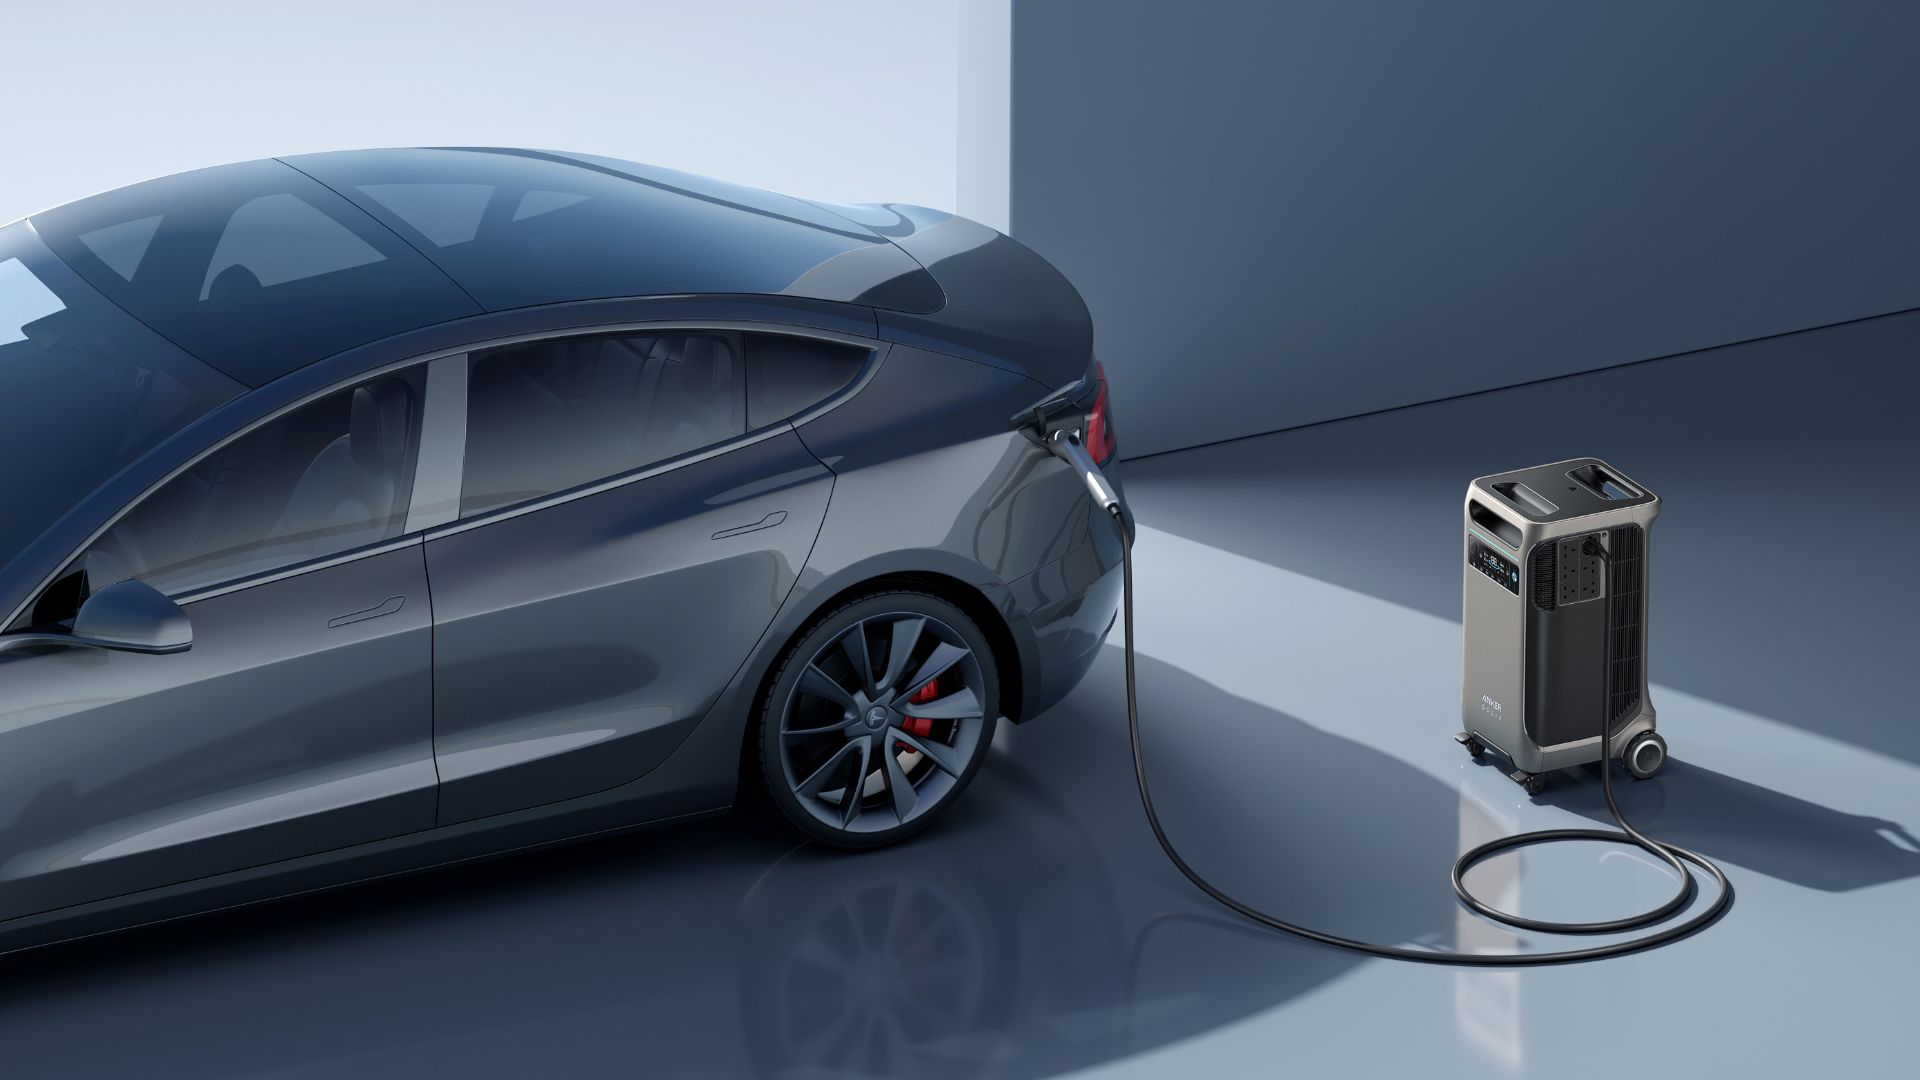 Anker SOLIX F3800 power station charging an electric car. 